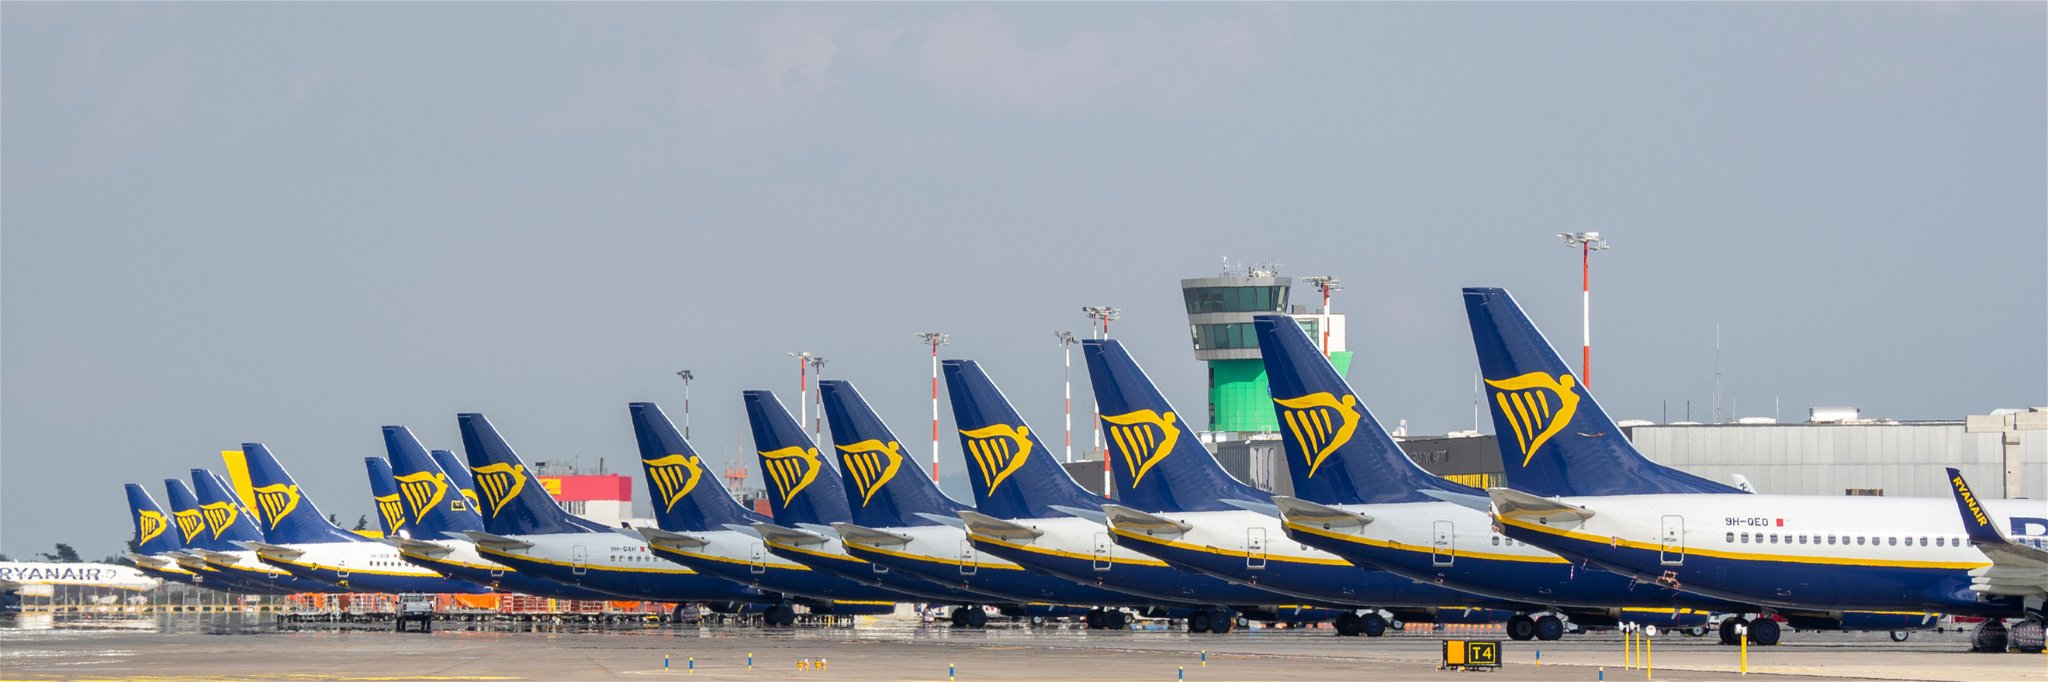 Dozens of Ryanair planes grounded in Italy during the pandemic in 2020.